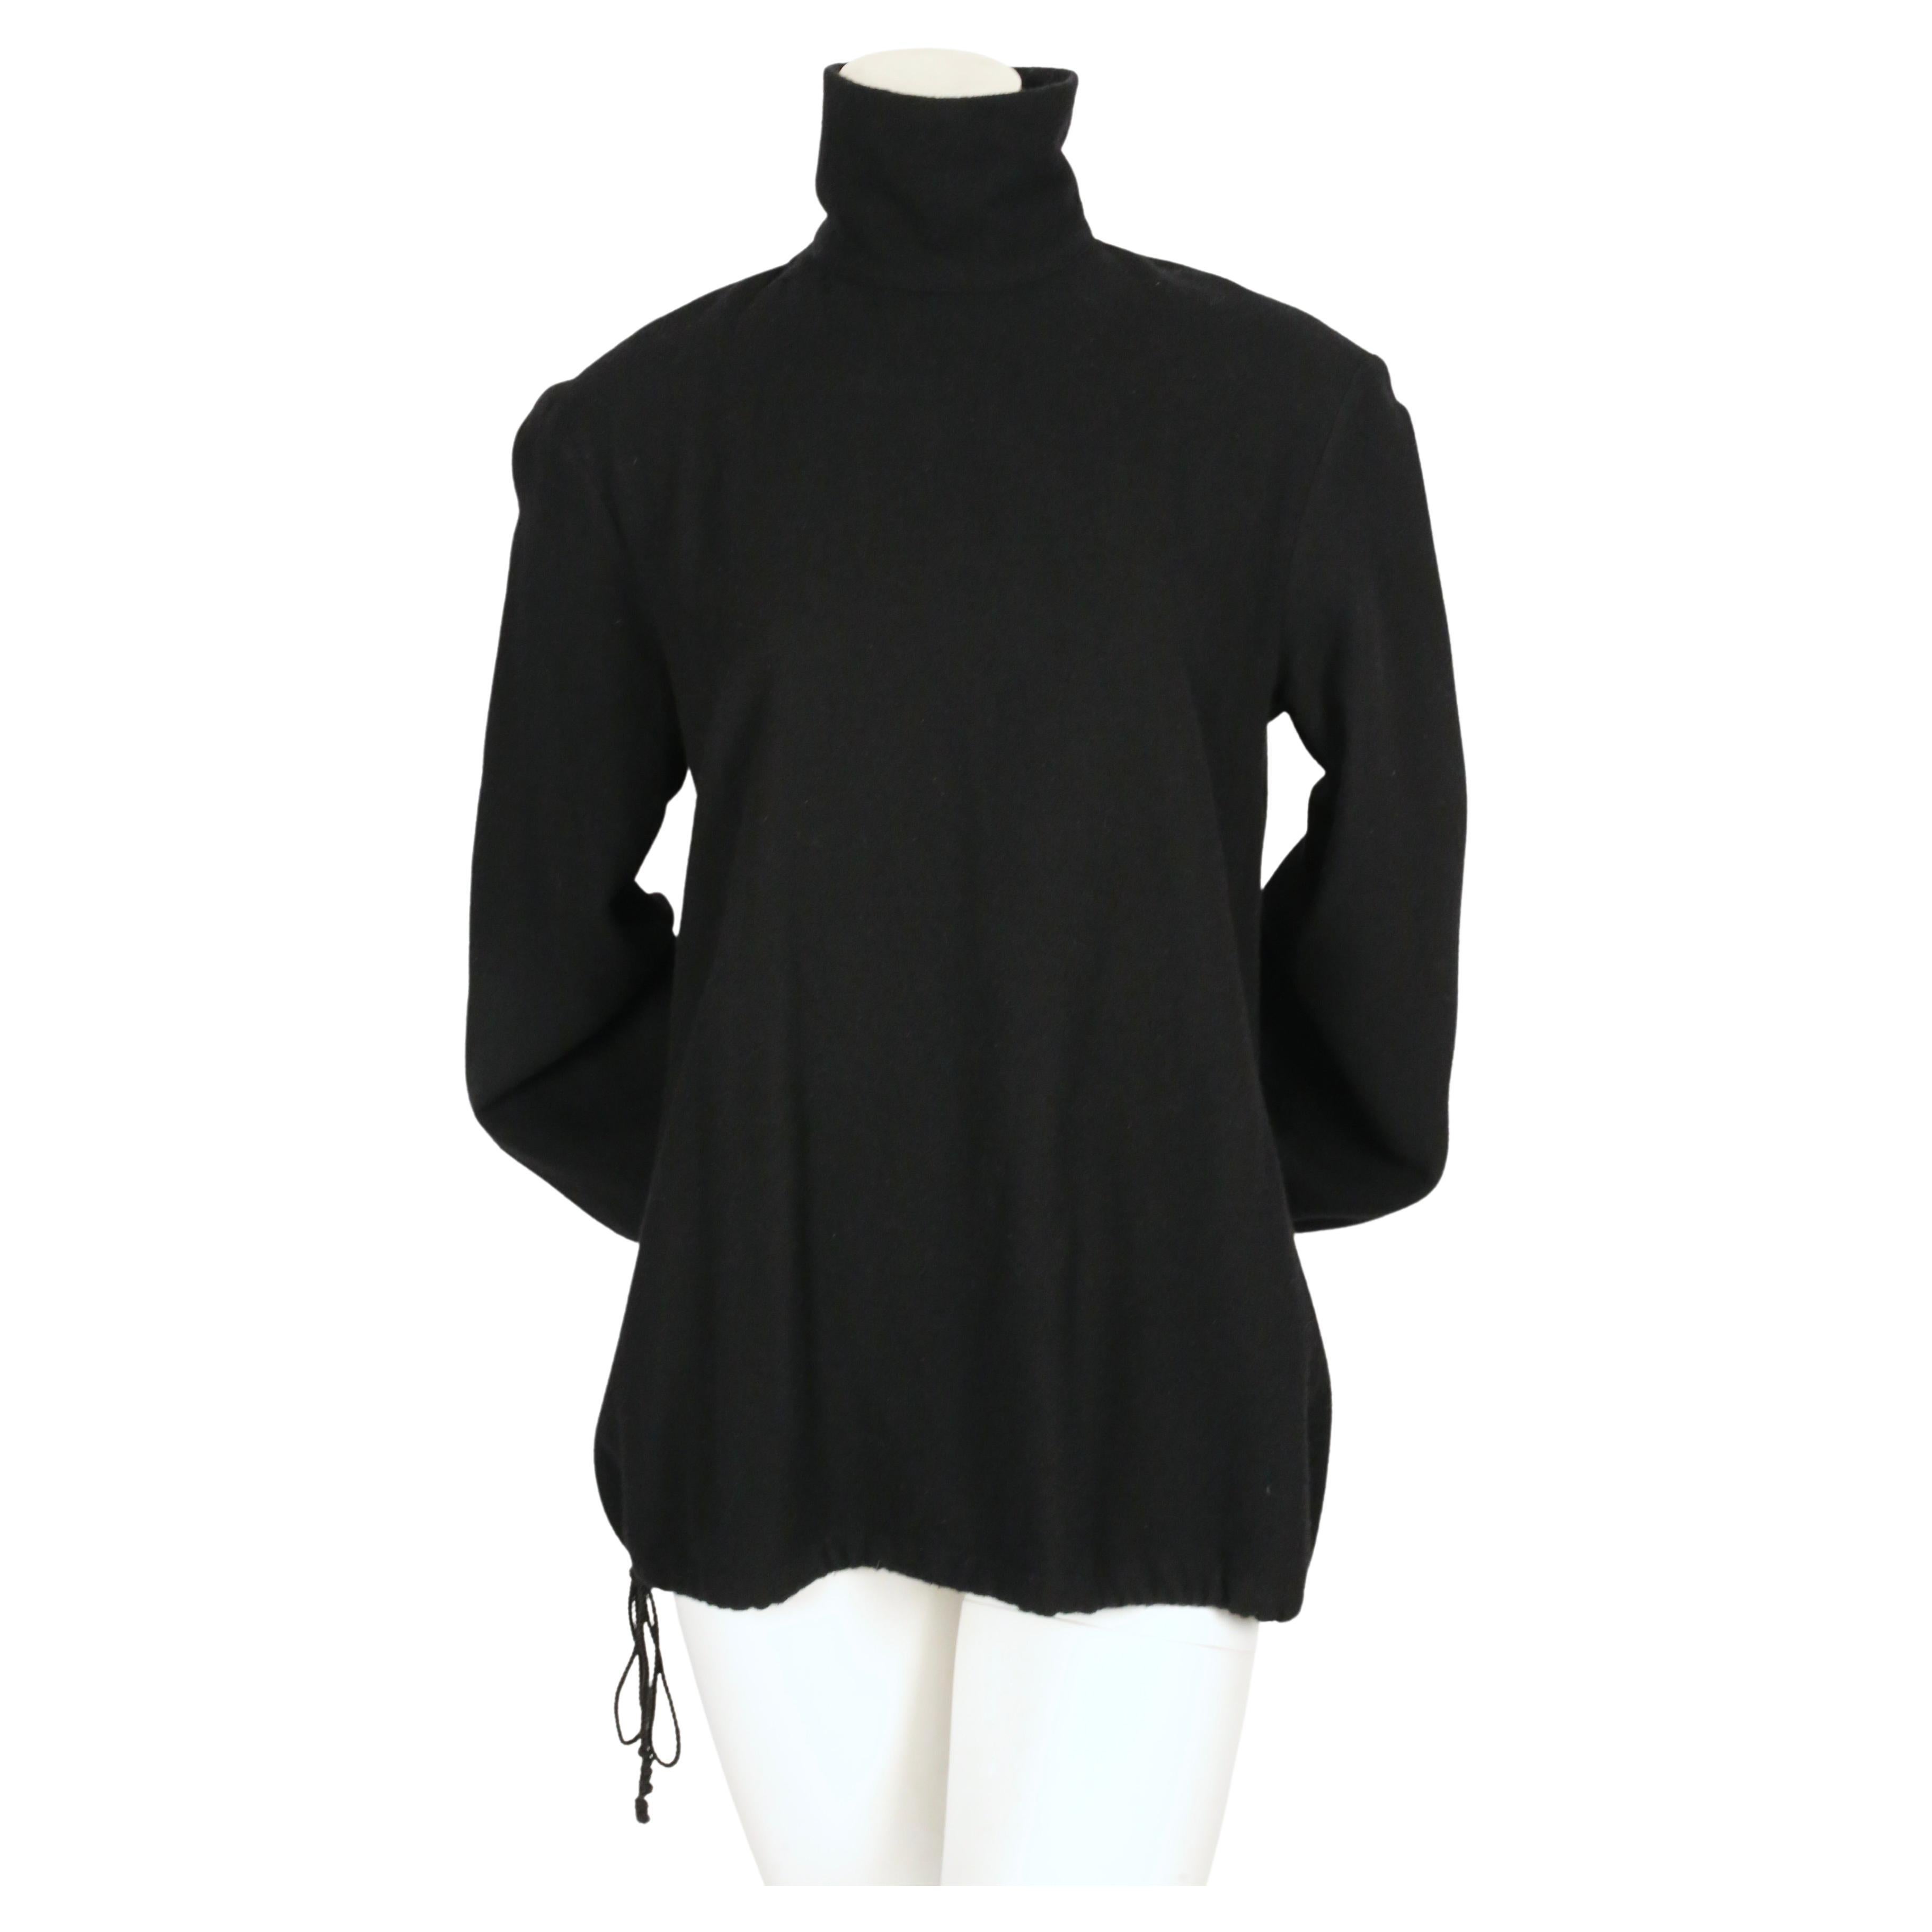 Billowy, jet-black high neck top with button back closure from Dries Van Noten dating to the 1980's. Size 40. Has an oversized/loose fit. Approximate measurements: shoulder 18